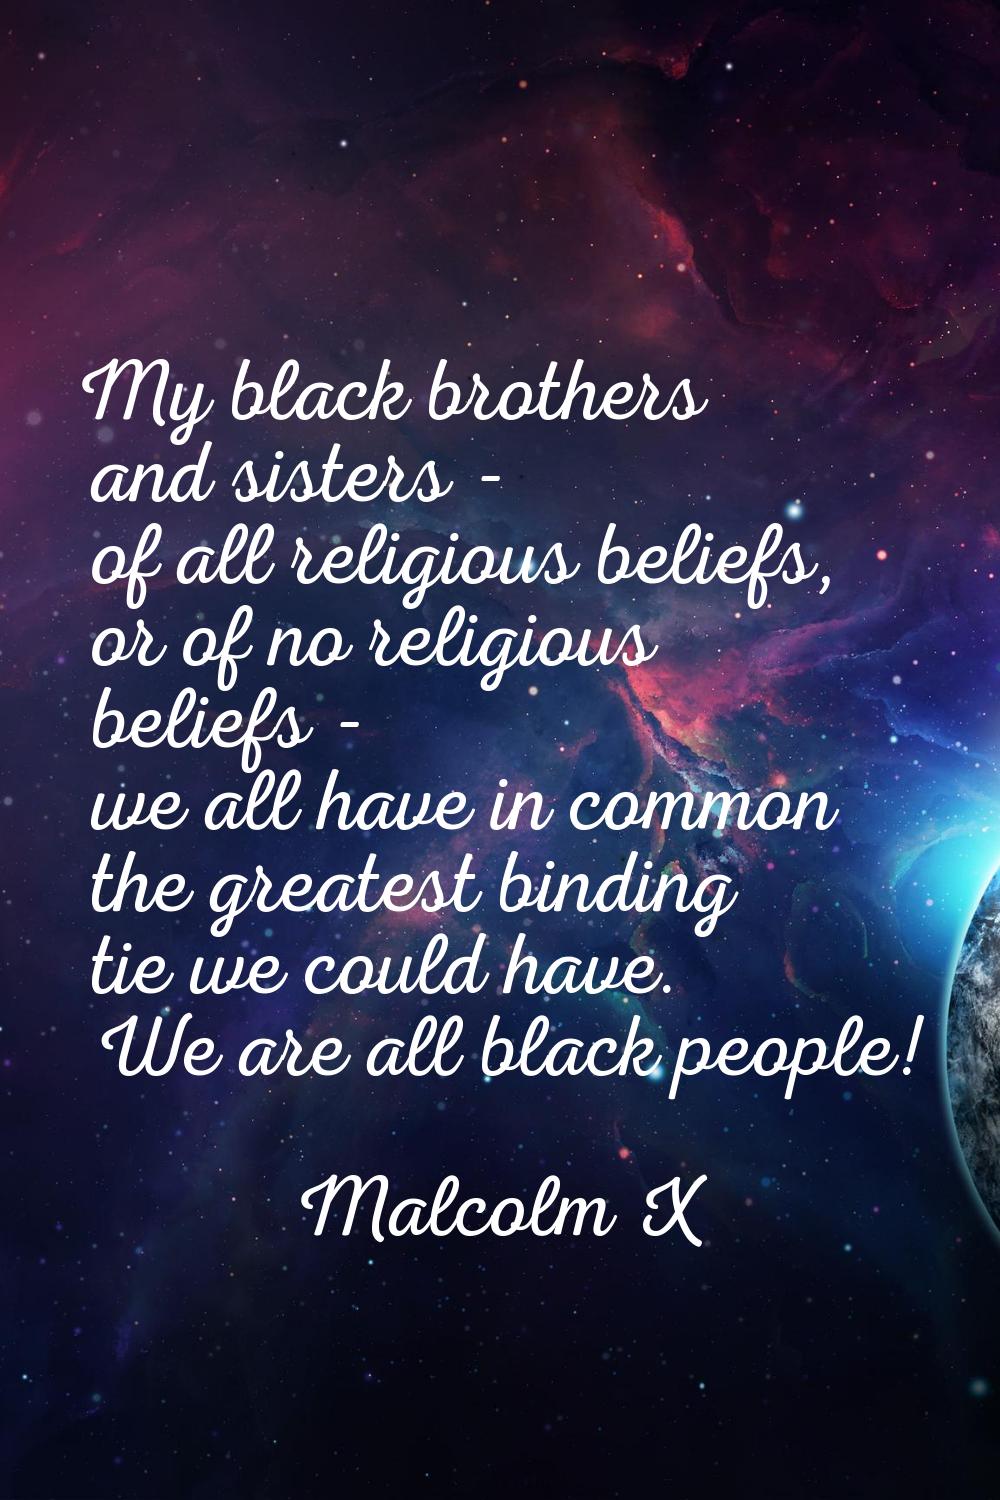 My black brothers and sisters - of all religious beliefs, or of no religious beliefs - we all have 